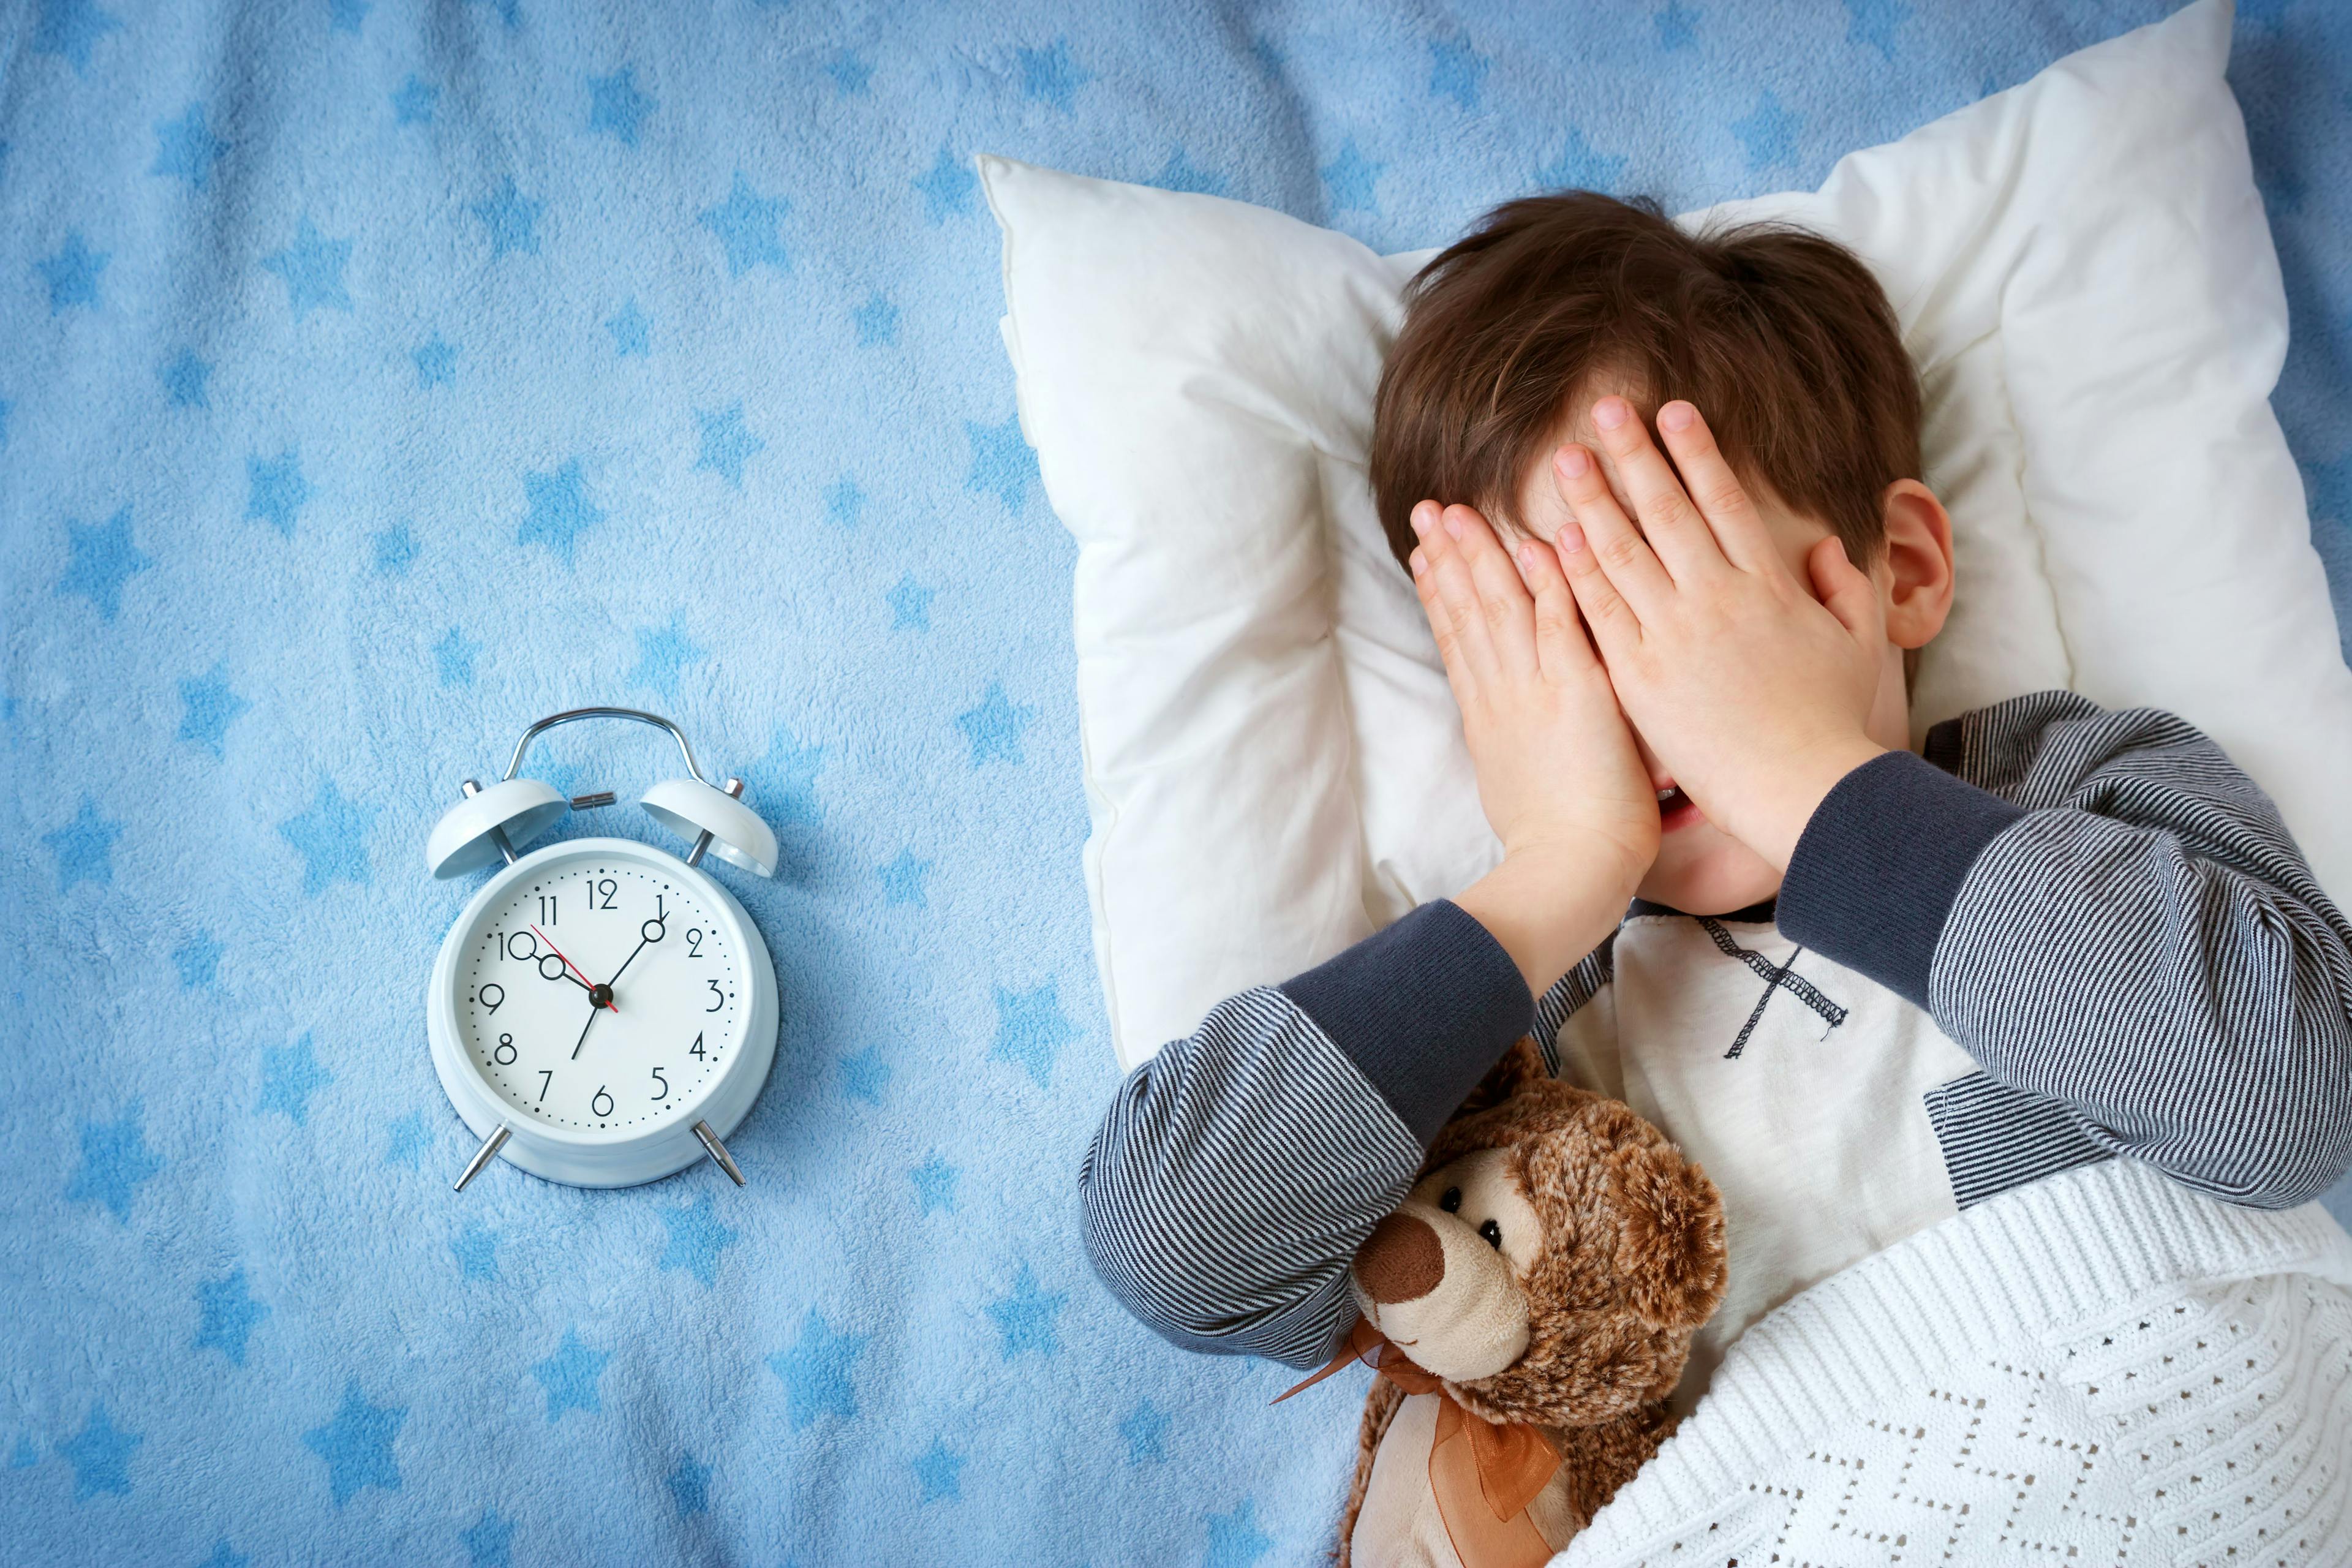 Good night, sleep tight! Researchers performed a 9-year follow-up of sleep disturbance and ADHD symptoms in a population-based cohort study.